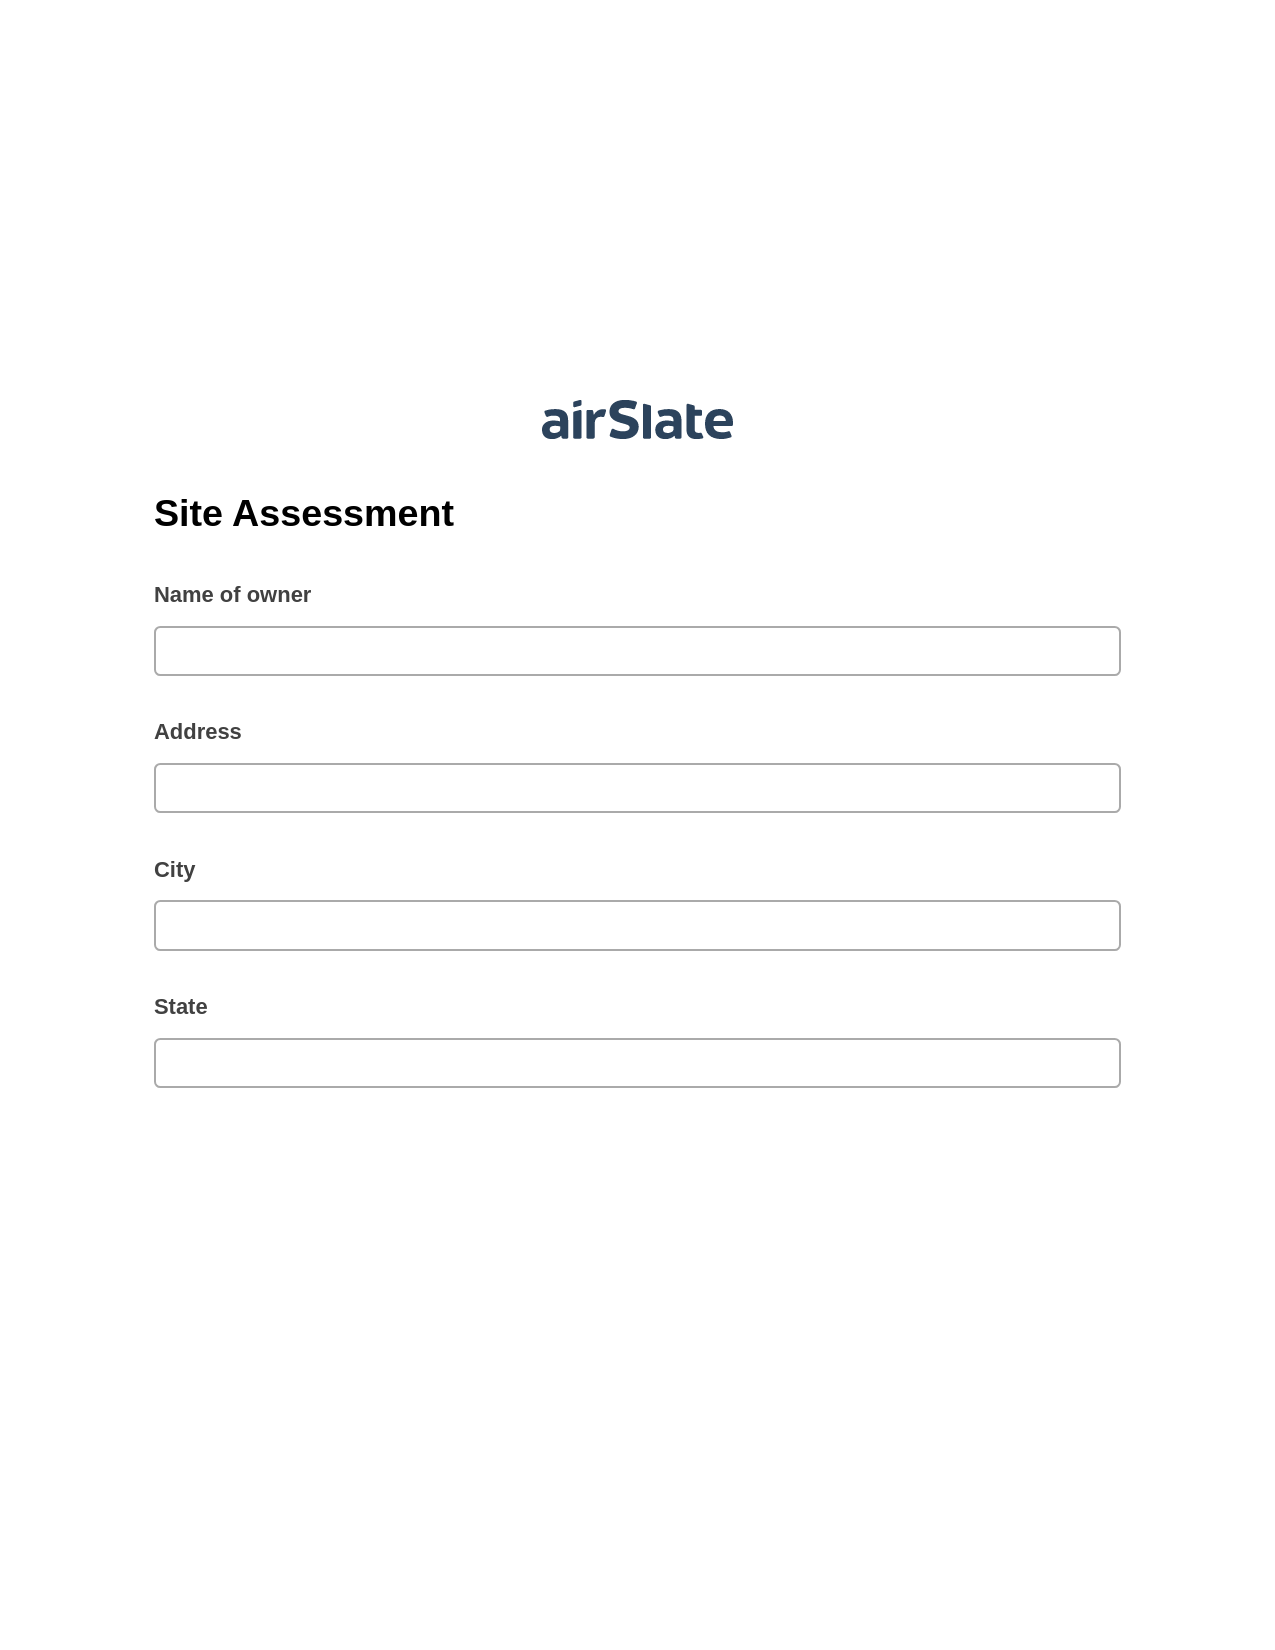 Site Assessment Pre-fill from Google Sheets Bot, Lock the slate bot, Export to Excel 365 Bot